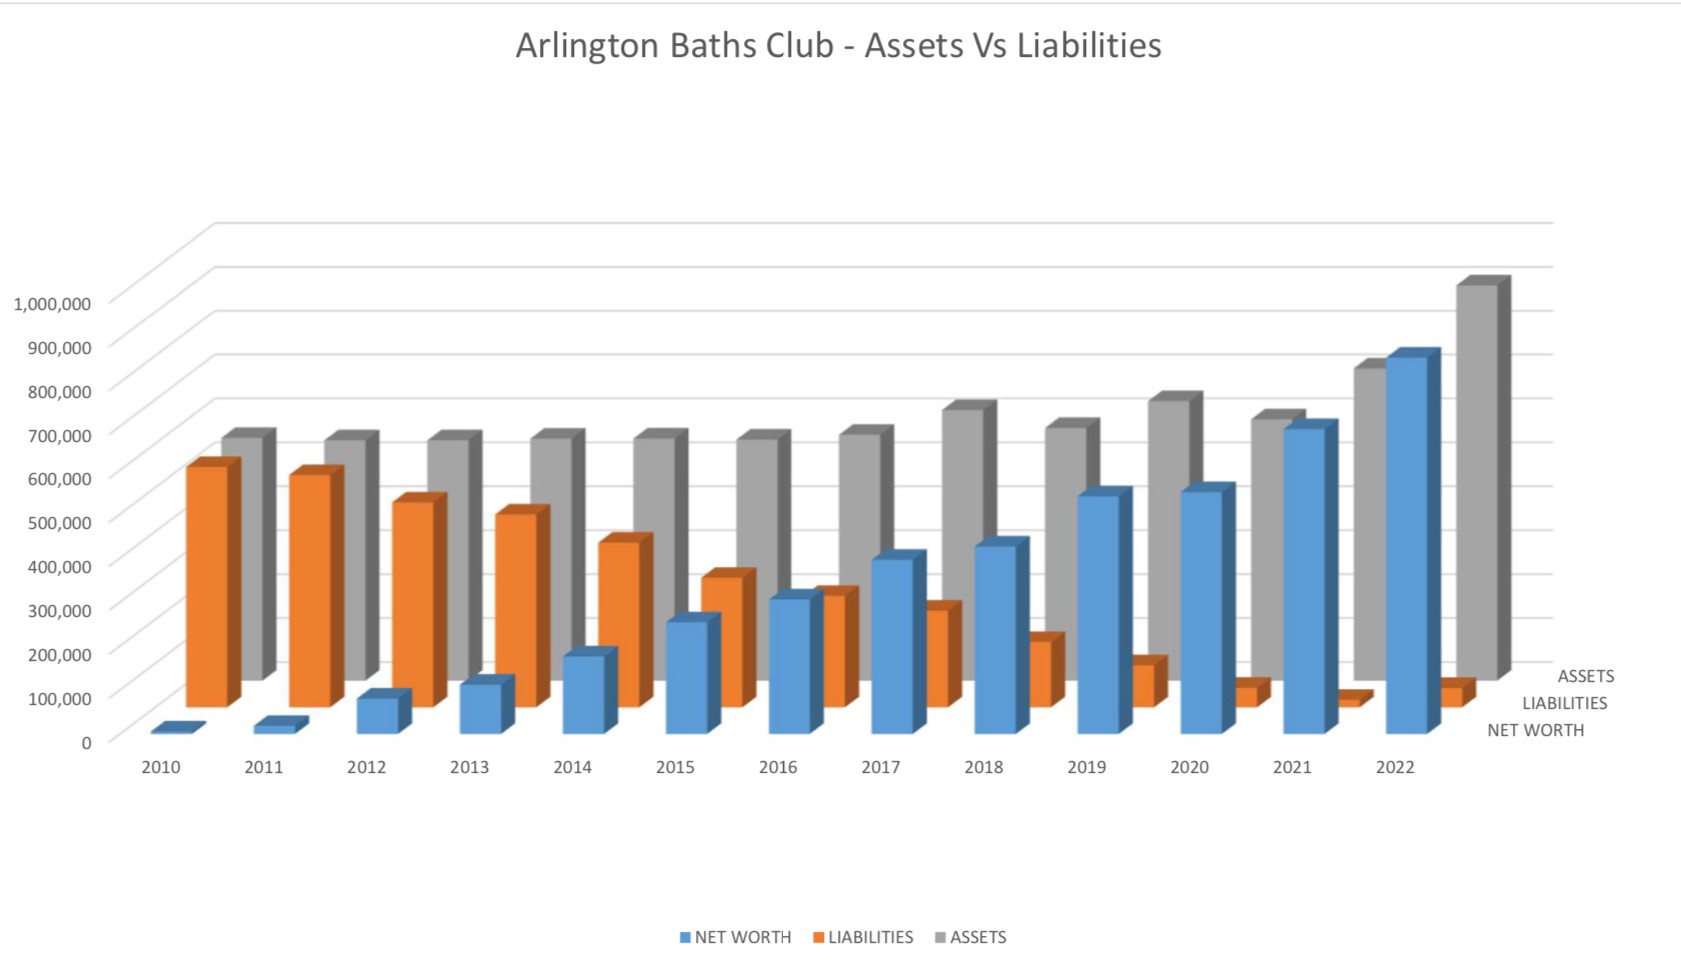 graph showing the net worth of the arlington baths club since 2000